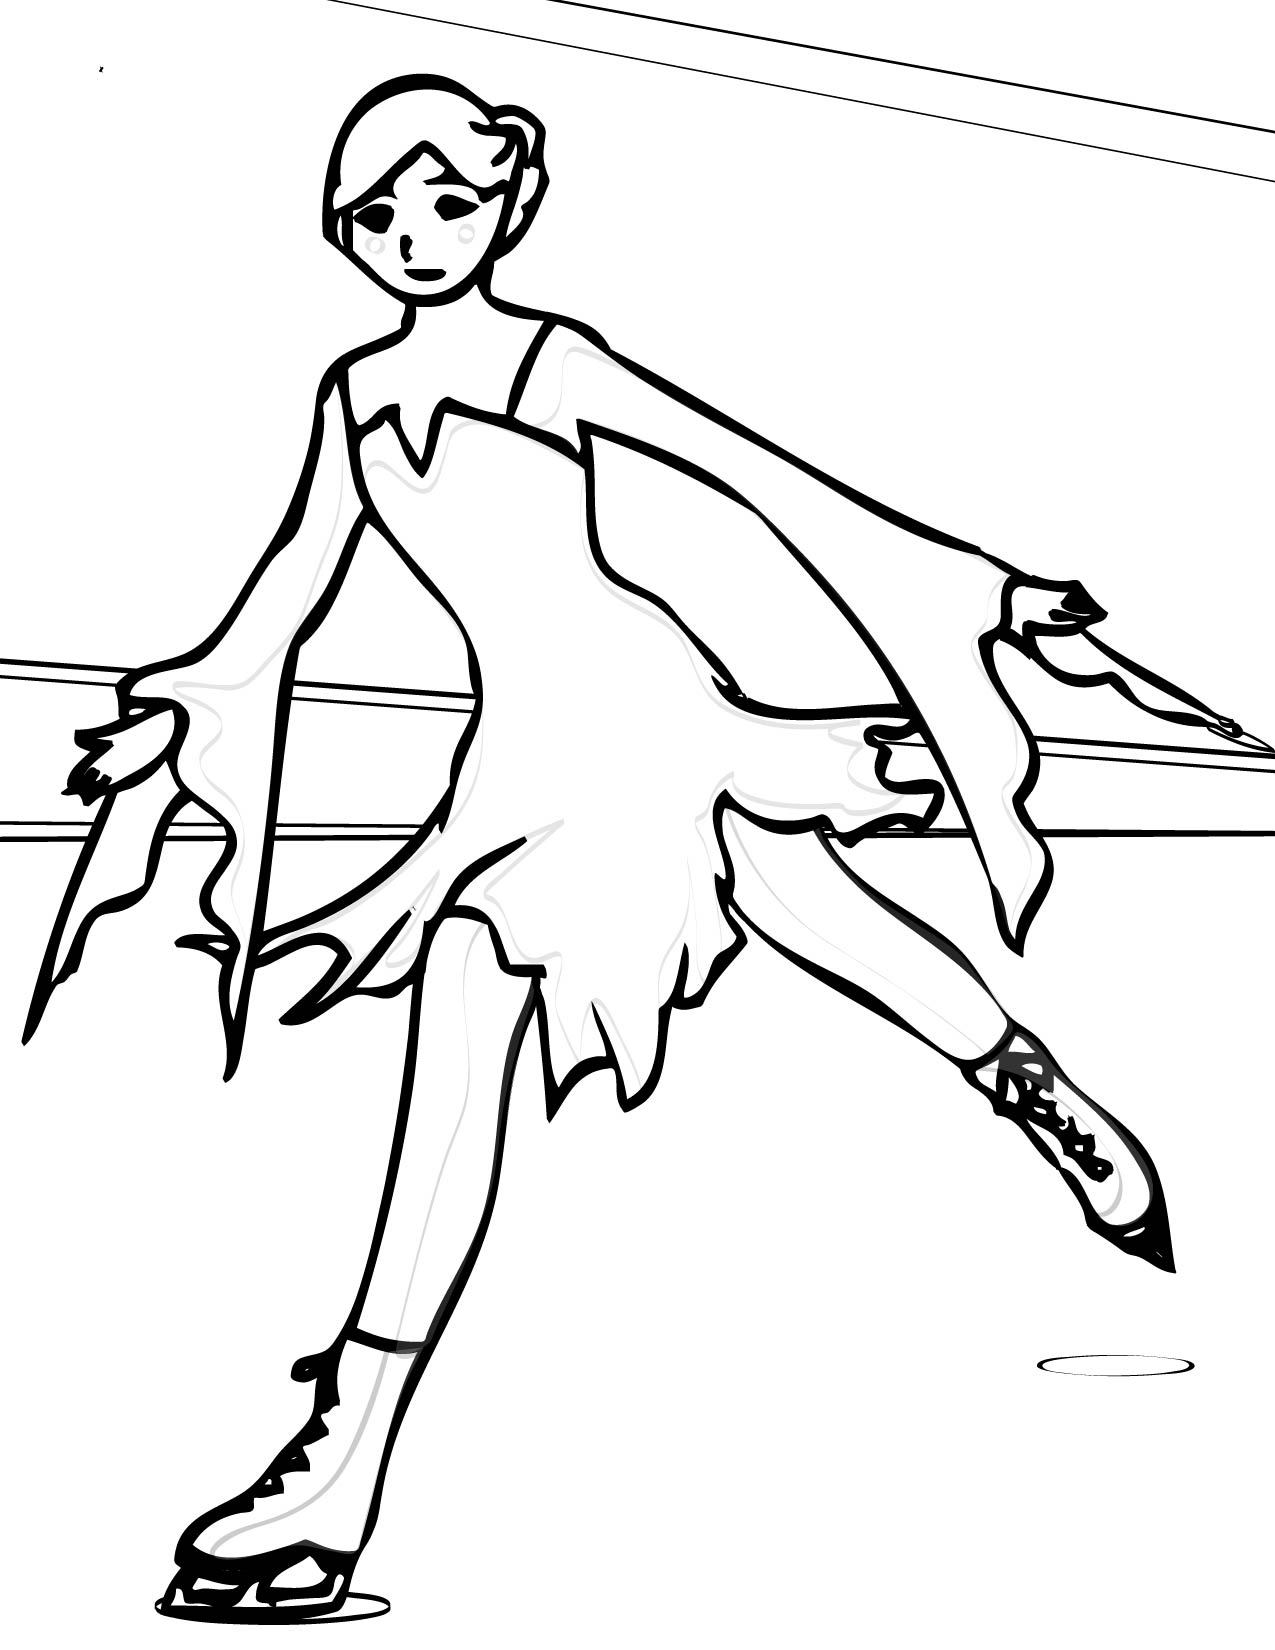 Ice skating coloring pages to download and print for free